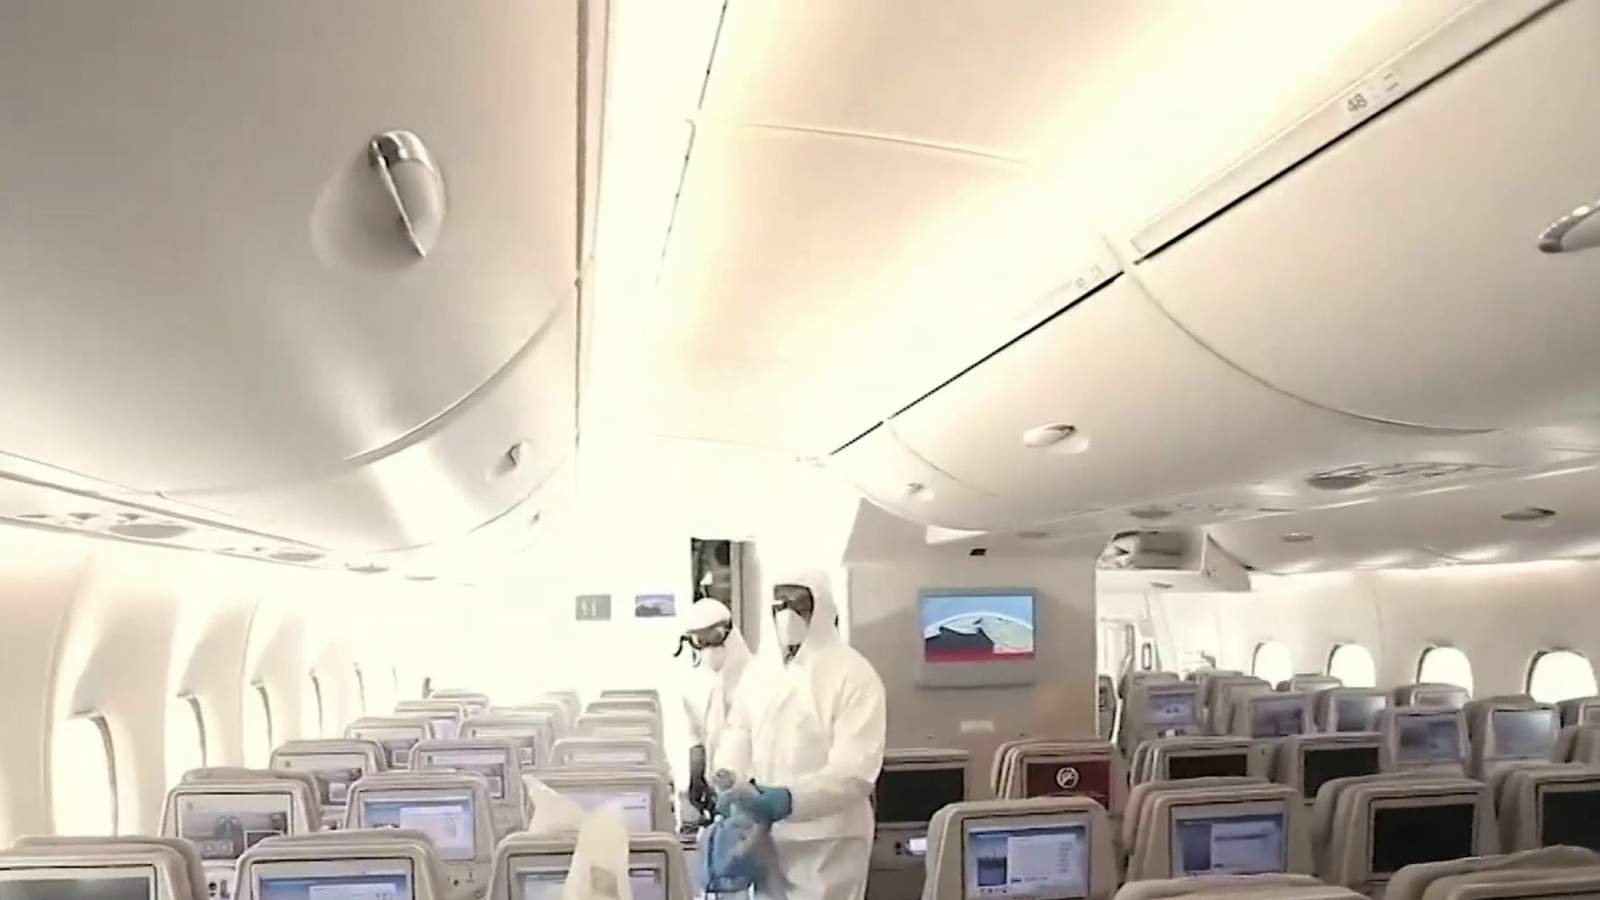 These are the precautions airlines are taking to prevent the spread of the coronavirus